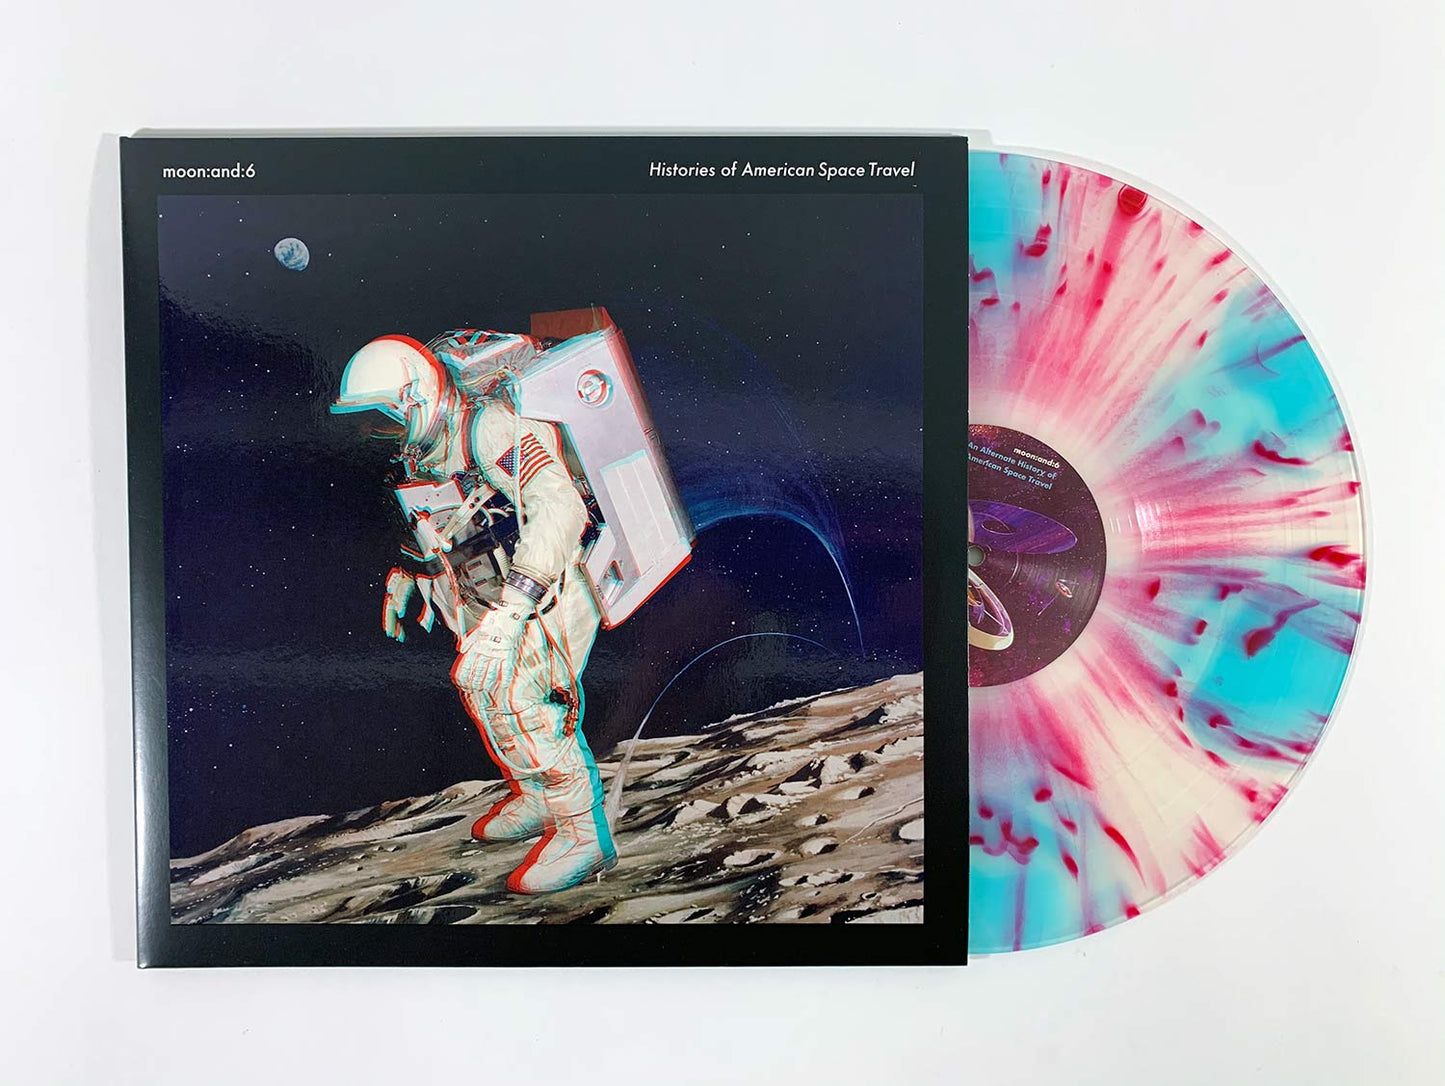 Load image into Gallery viewer, moon:and:6 - Histories Of American Space Travel (Deluxe Etching 2xLP) [VM Exclusive]
